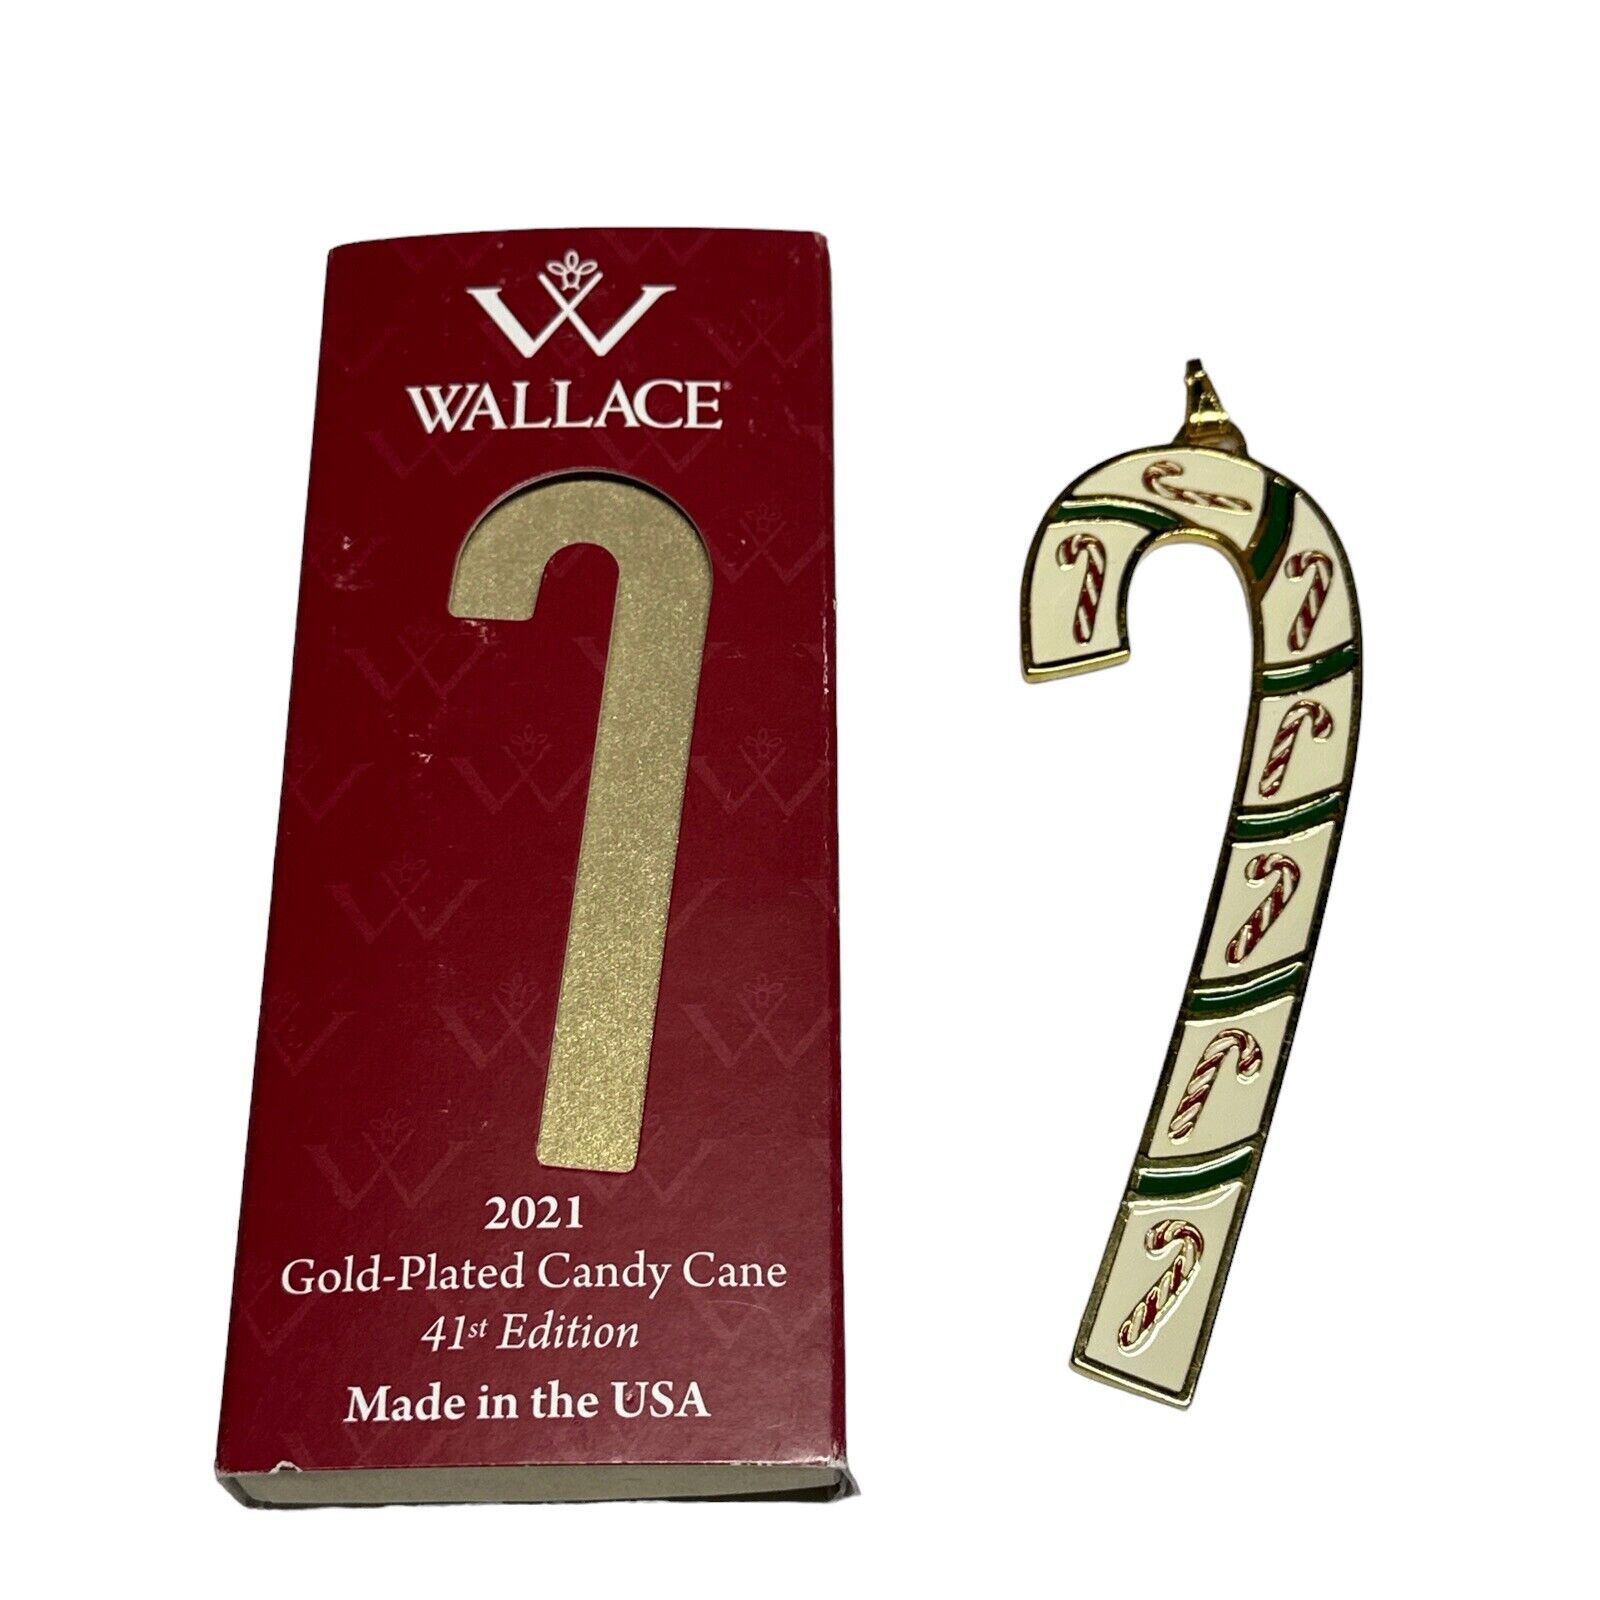 2021 Wallace Candy Cane 41st Edition Annual Goldplate & Enamel Ornament #11946